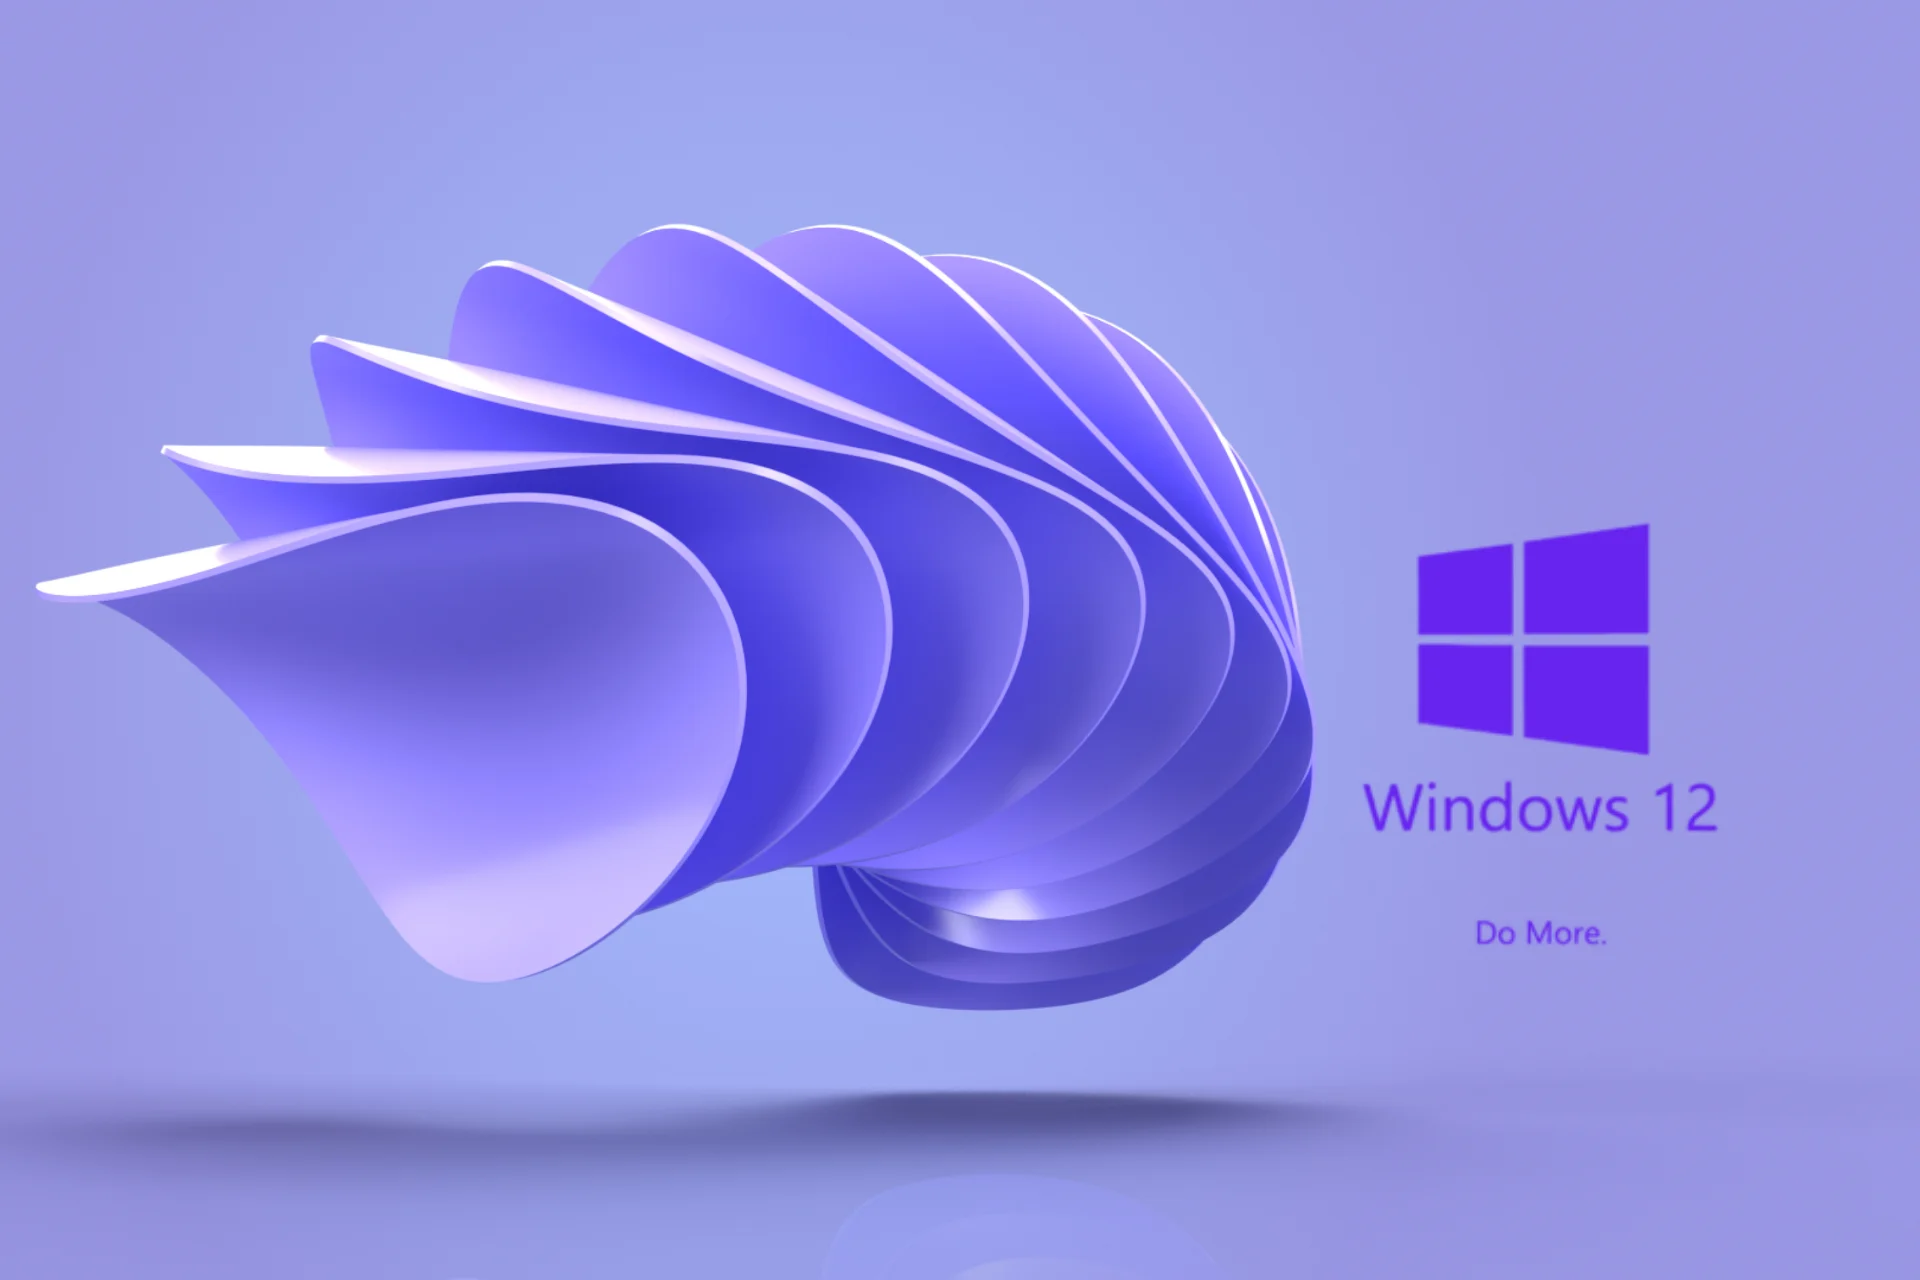 Windows 12, Rumors on Exciting Features and Release Date Unveiled